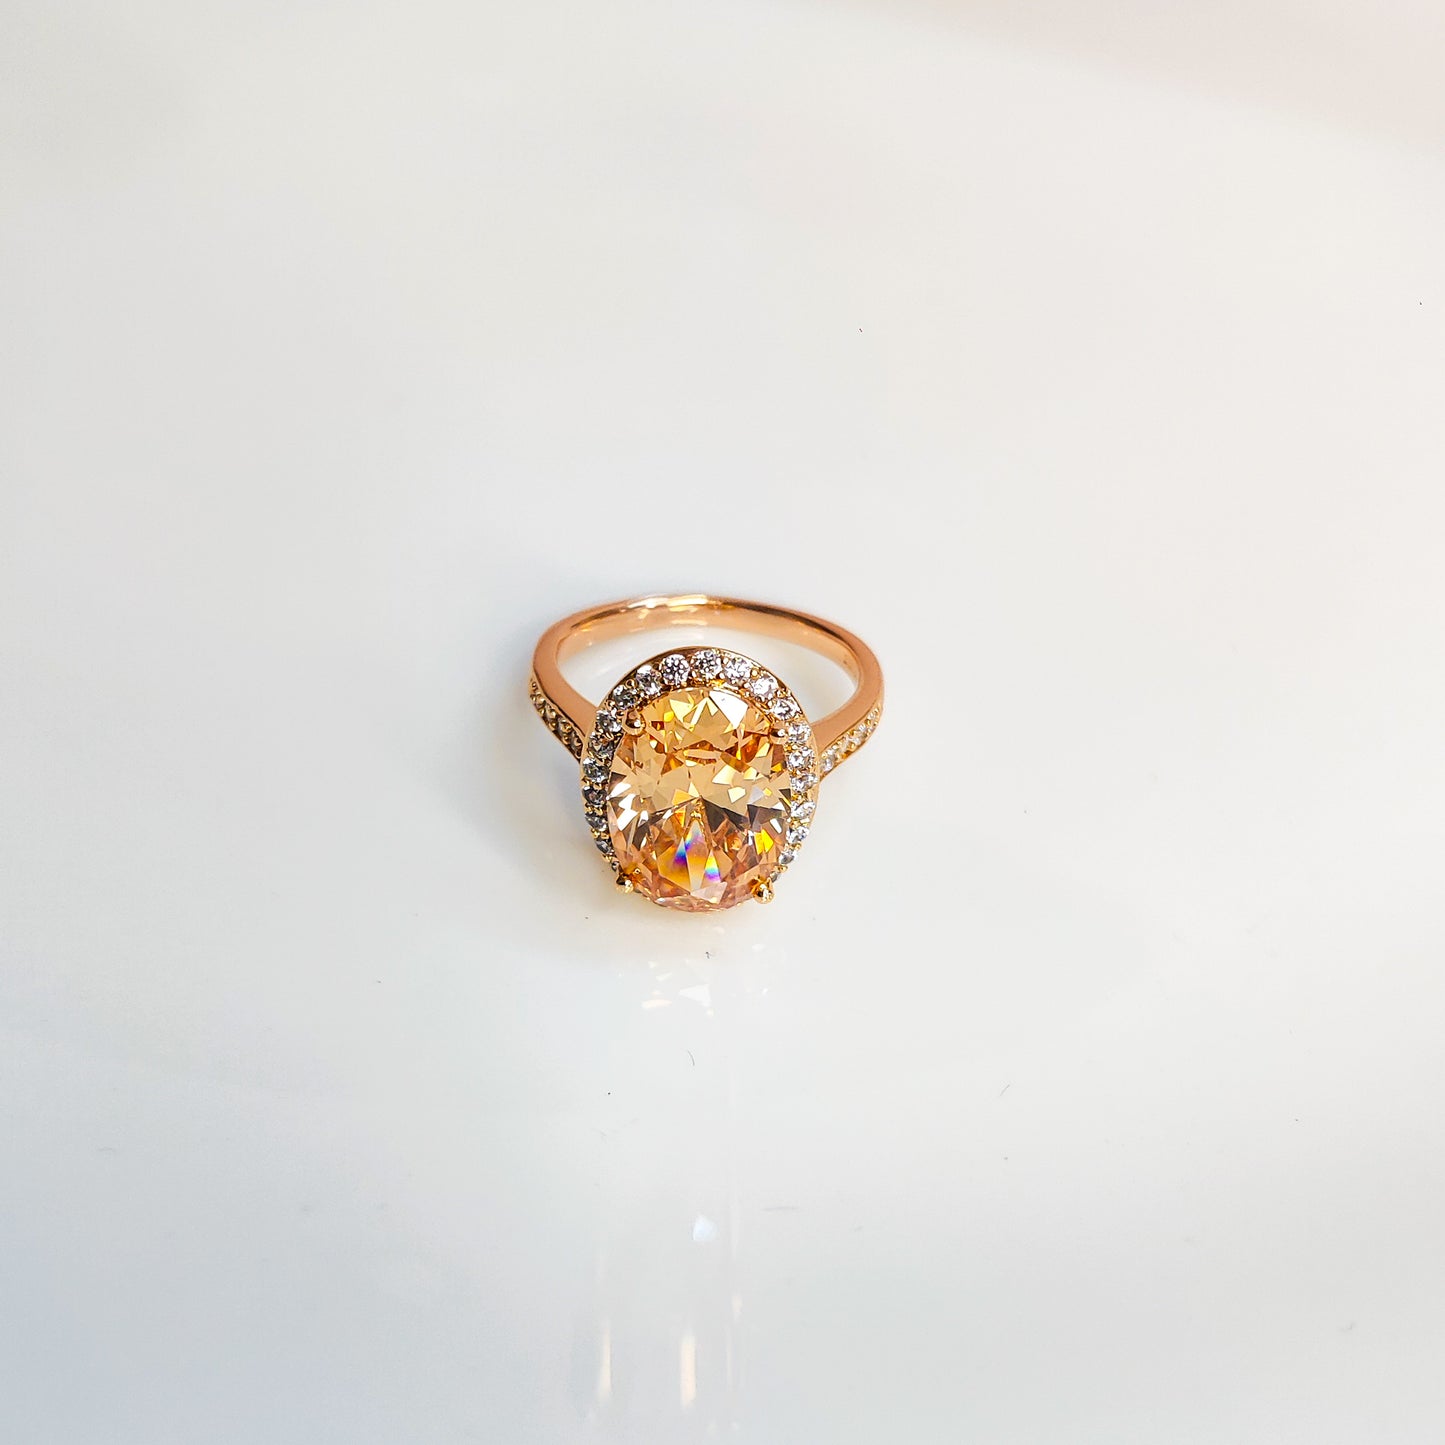 Dawn's Citrine Solitaire Ring